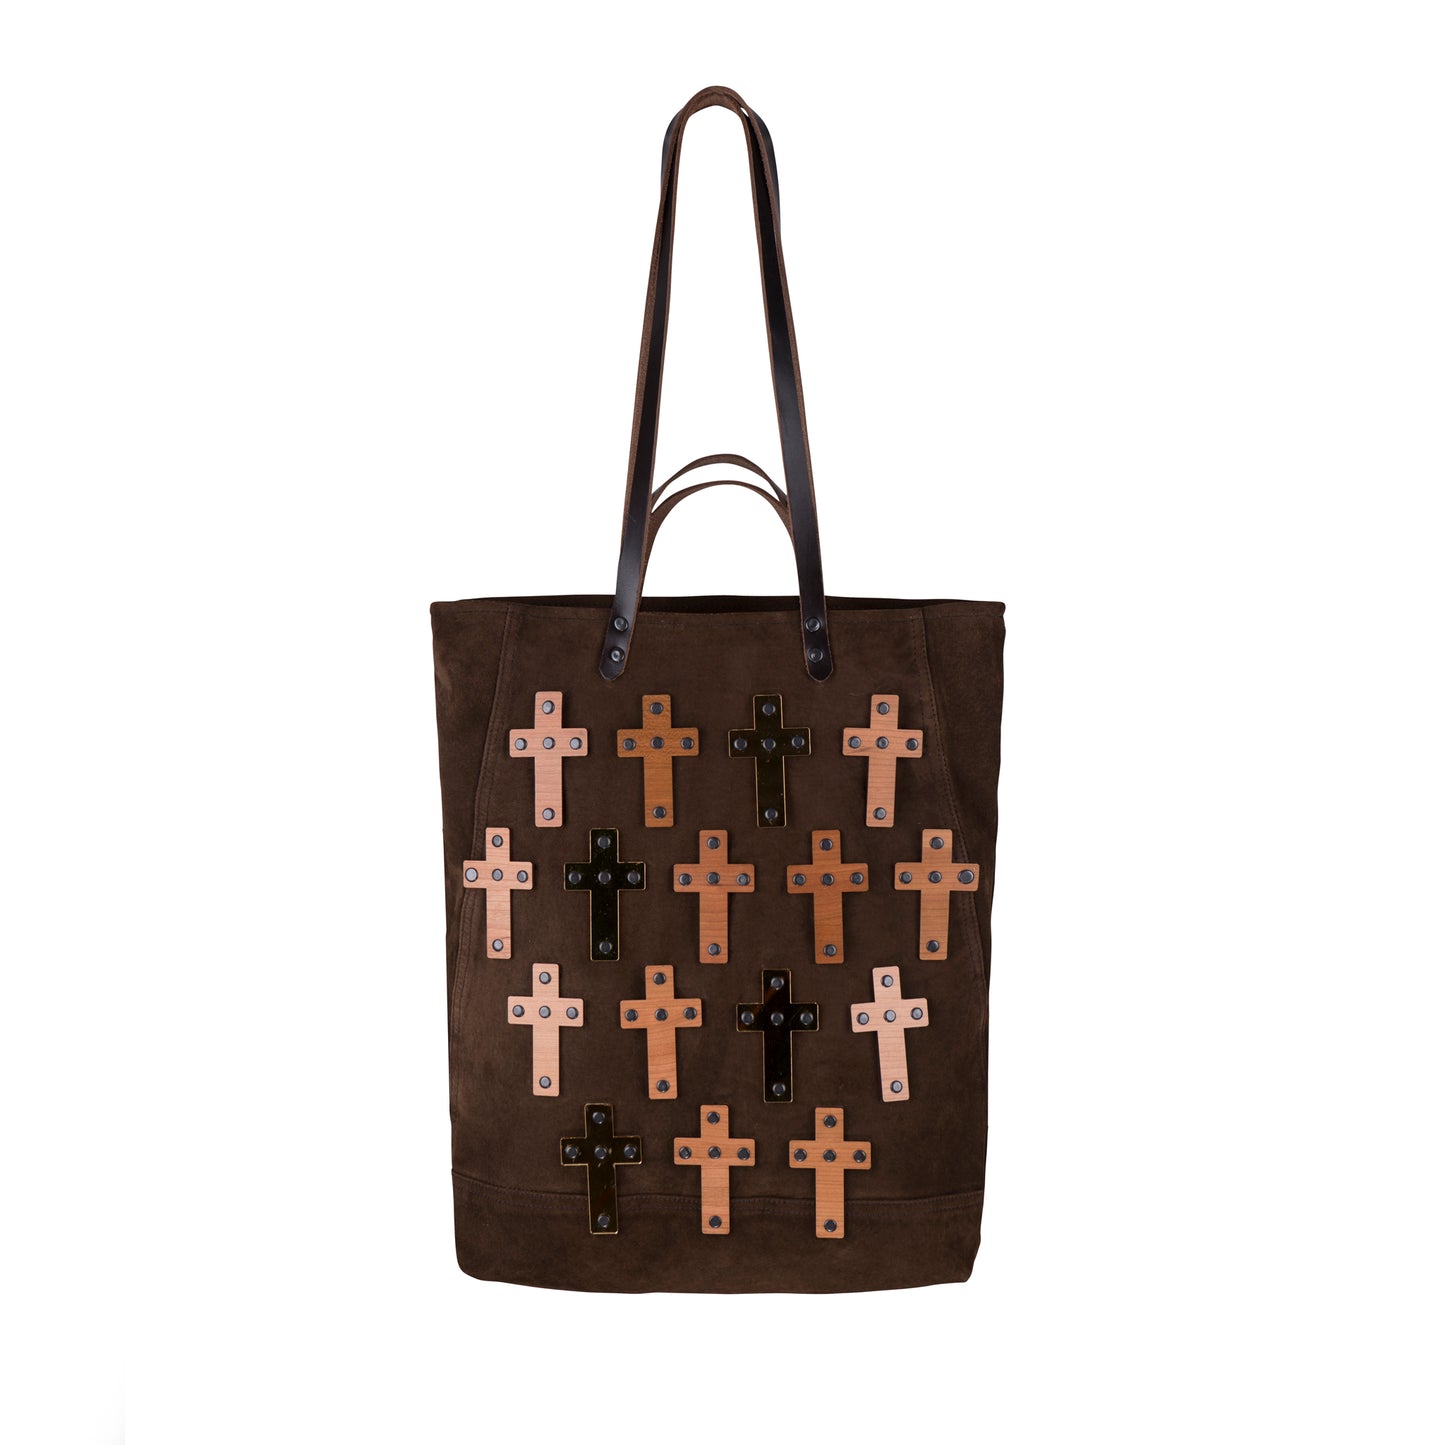 METANoIA The Cross Chocolate recycled leather tote handbag with cross shaped bamboo, walnut and metallic acrylic forms.